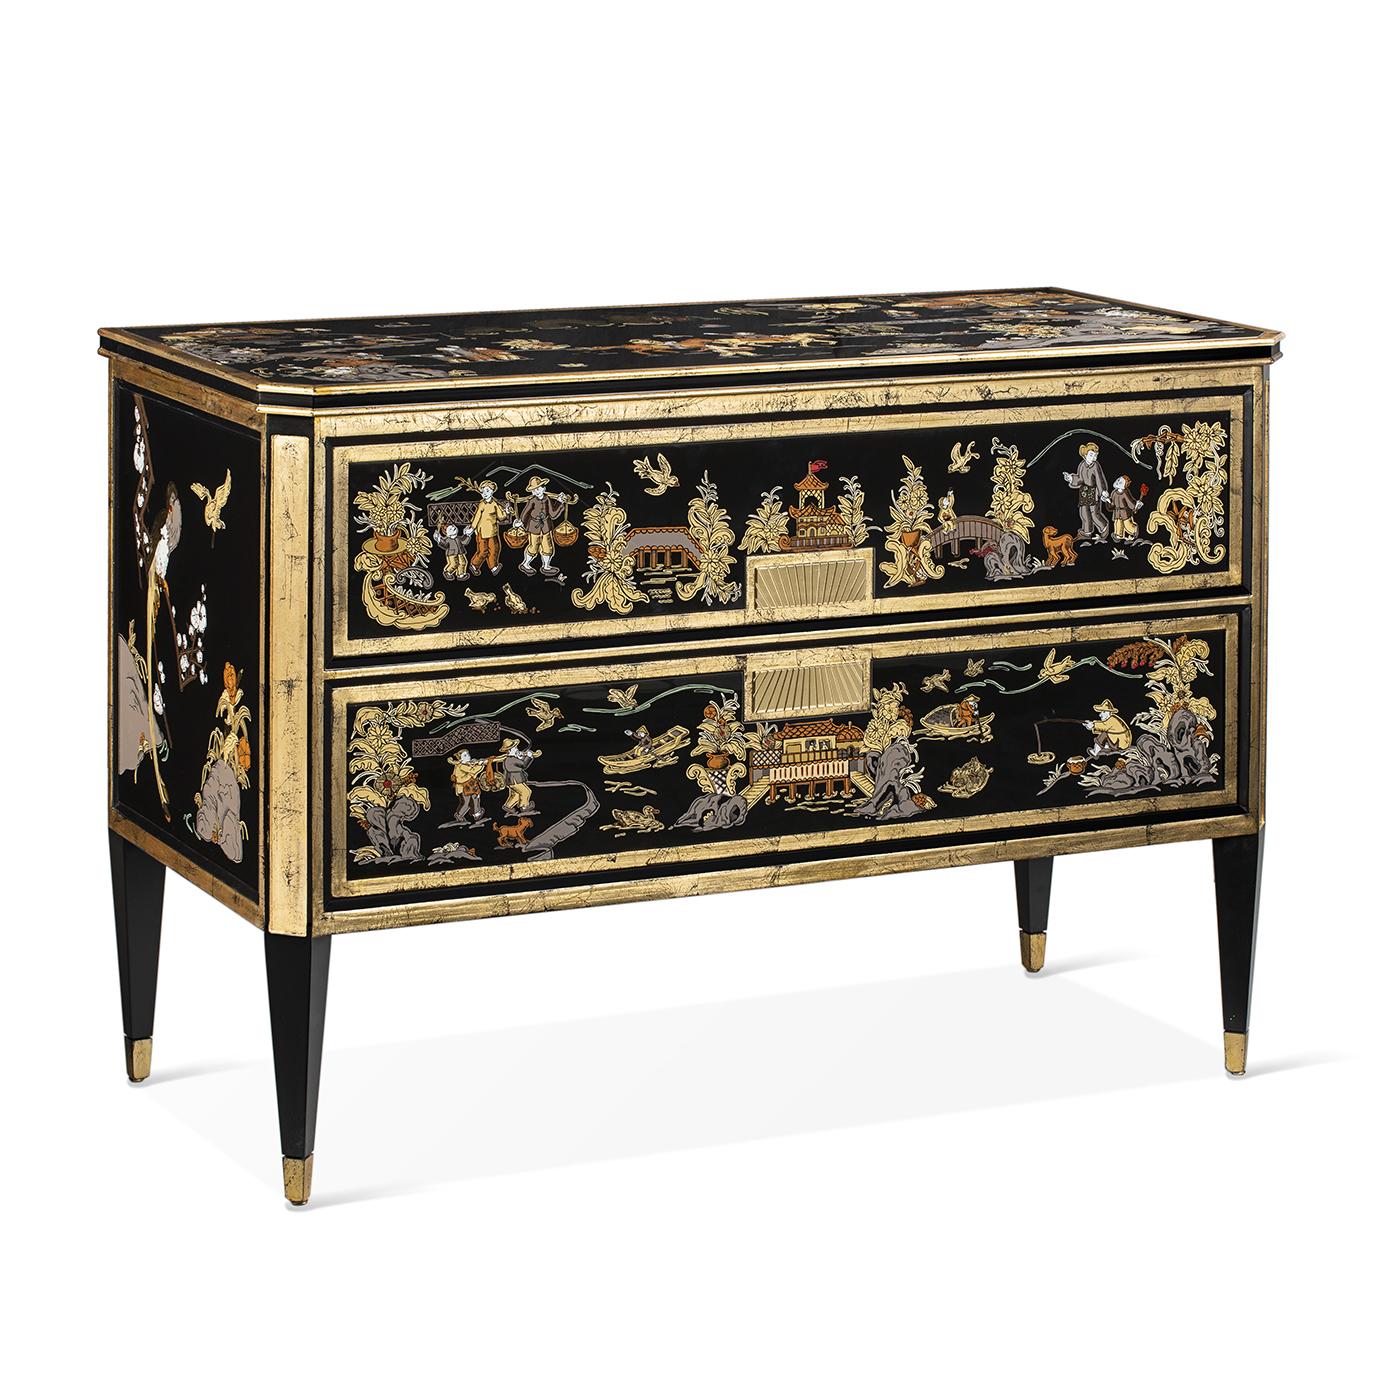 A fancy sideboard full of hand-painted decorations on glass with gold leaves and golden brass. It has 2 big drawers sliding on metal guides and then its front, sides, and top are heavily decorated giving a spectacular and majestic vibe to any room.